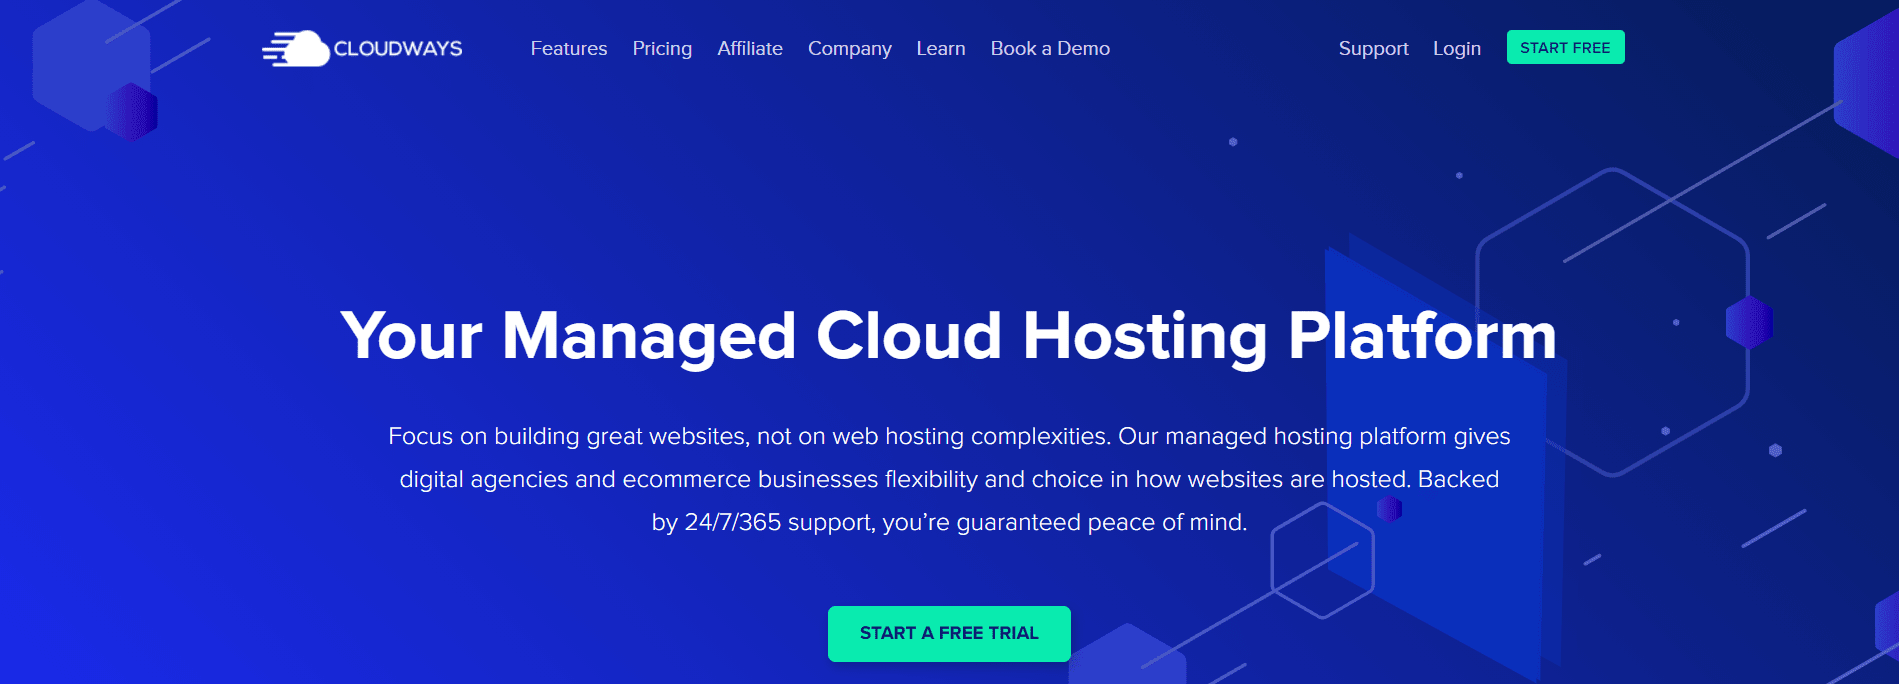 Cloudways Overview